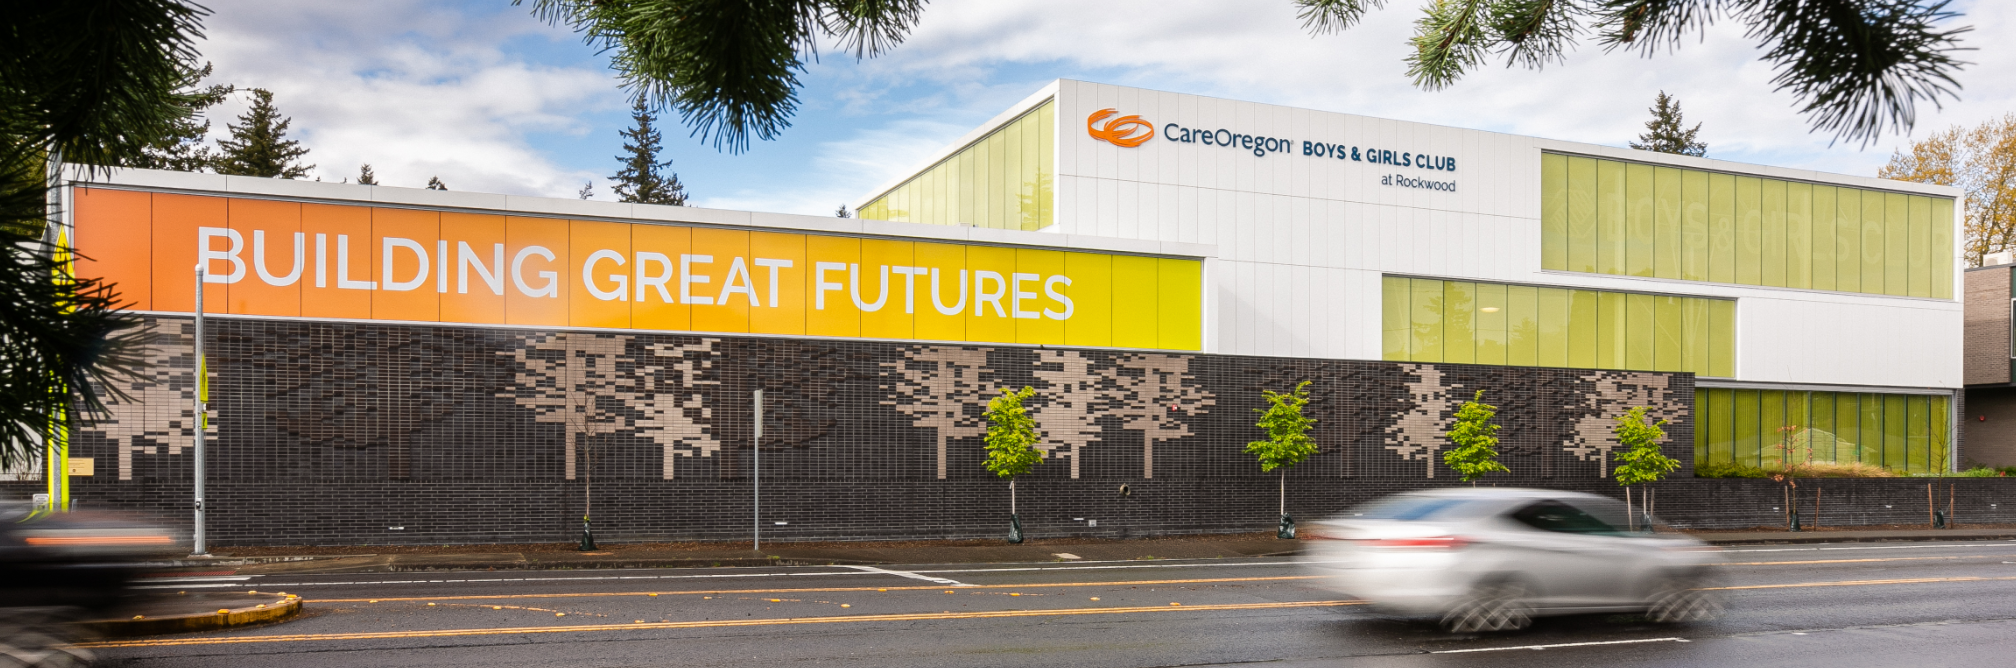 Against shades of orange, yellow and yellow-green, Building great futures, in large white capital letters, spans a white rectangular building. A sign on top of the building identifies it as CareOregon Boys & Girls Club at Rockwood.